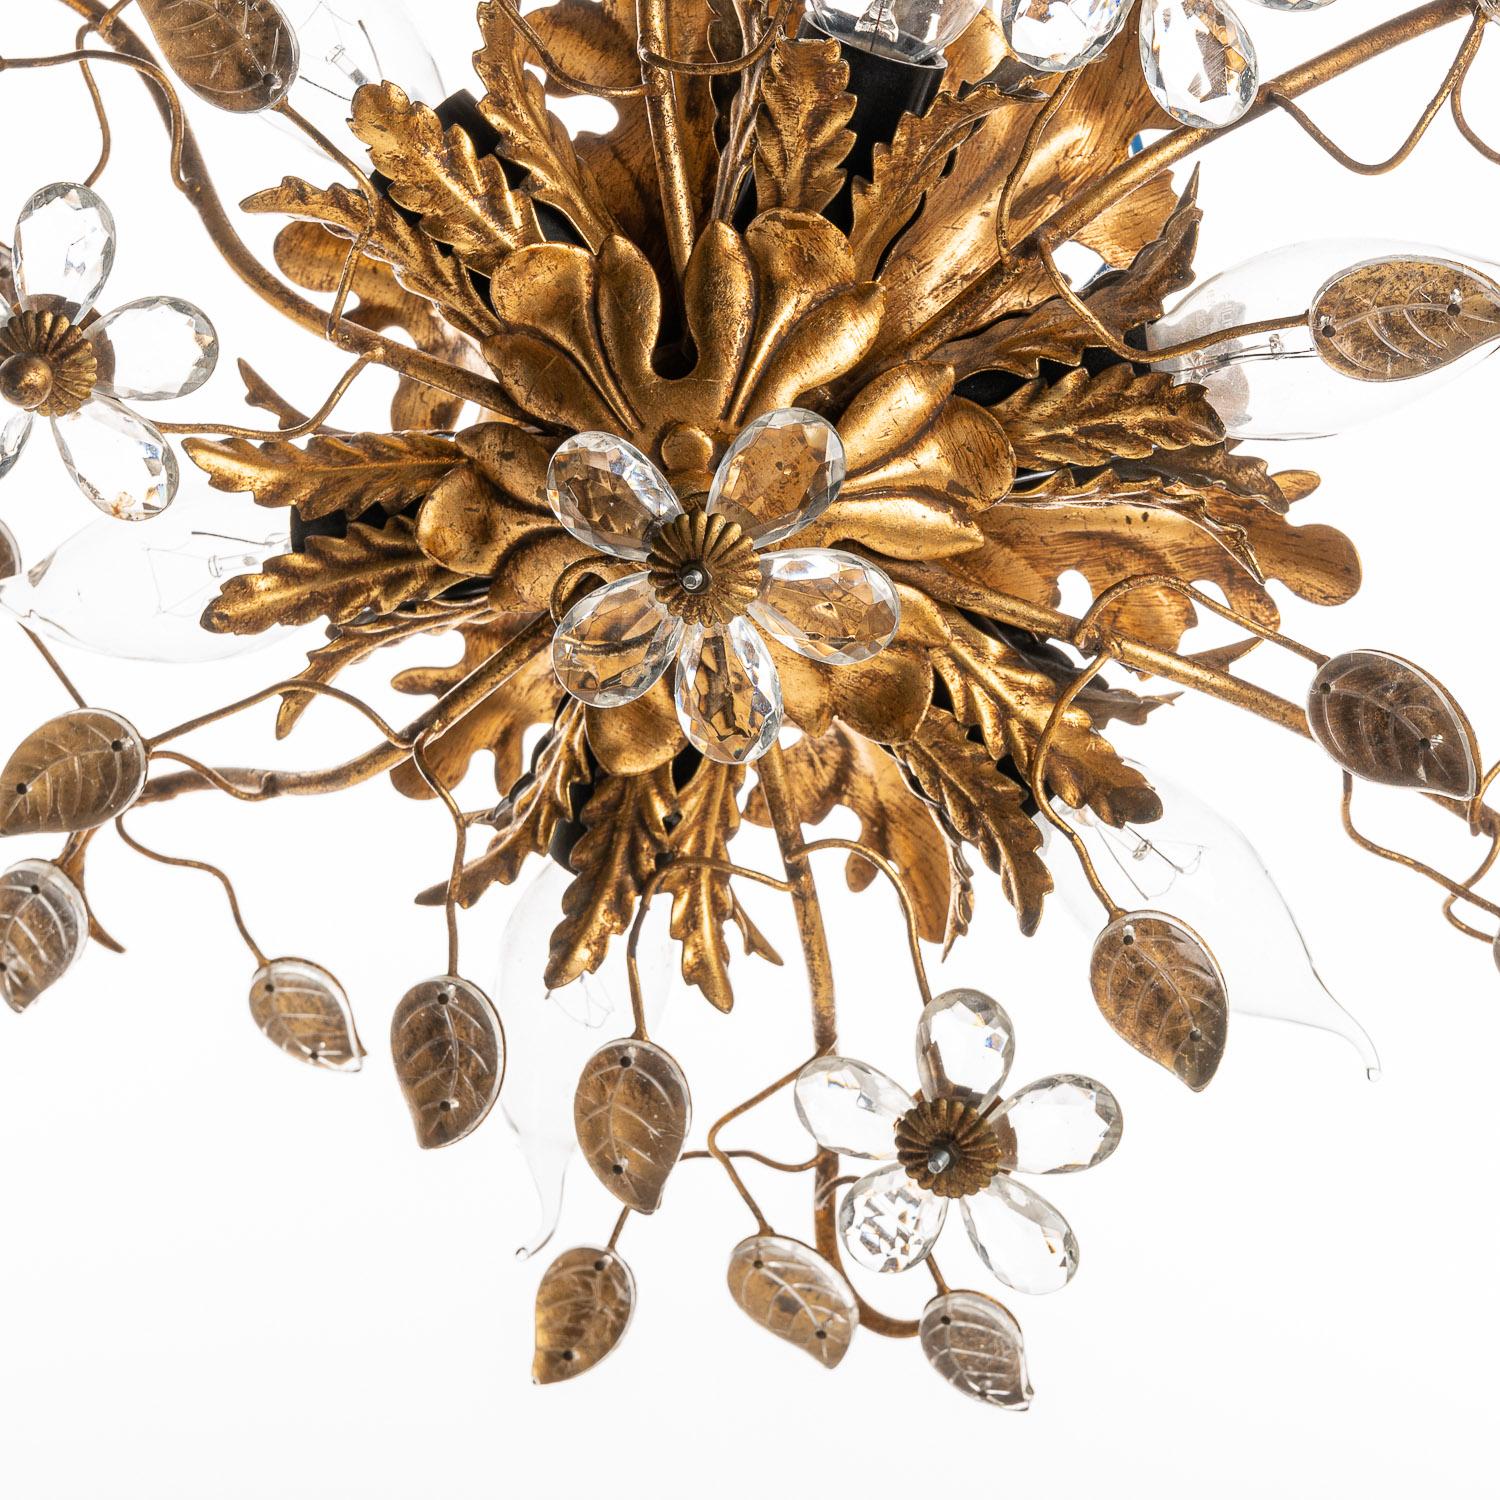 This intricately-crafted piece comes from the 1970s designer Bani Firenzi. The brass-coloured arms stretch and weave together from the base, branching out to beautifully ornate leaves and crystal flowers. The base contains six connections for bulbs,